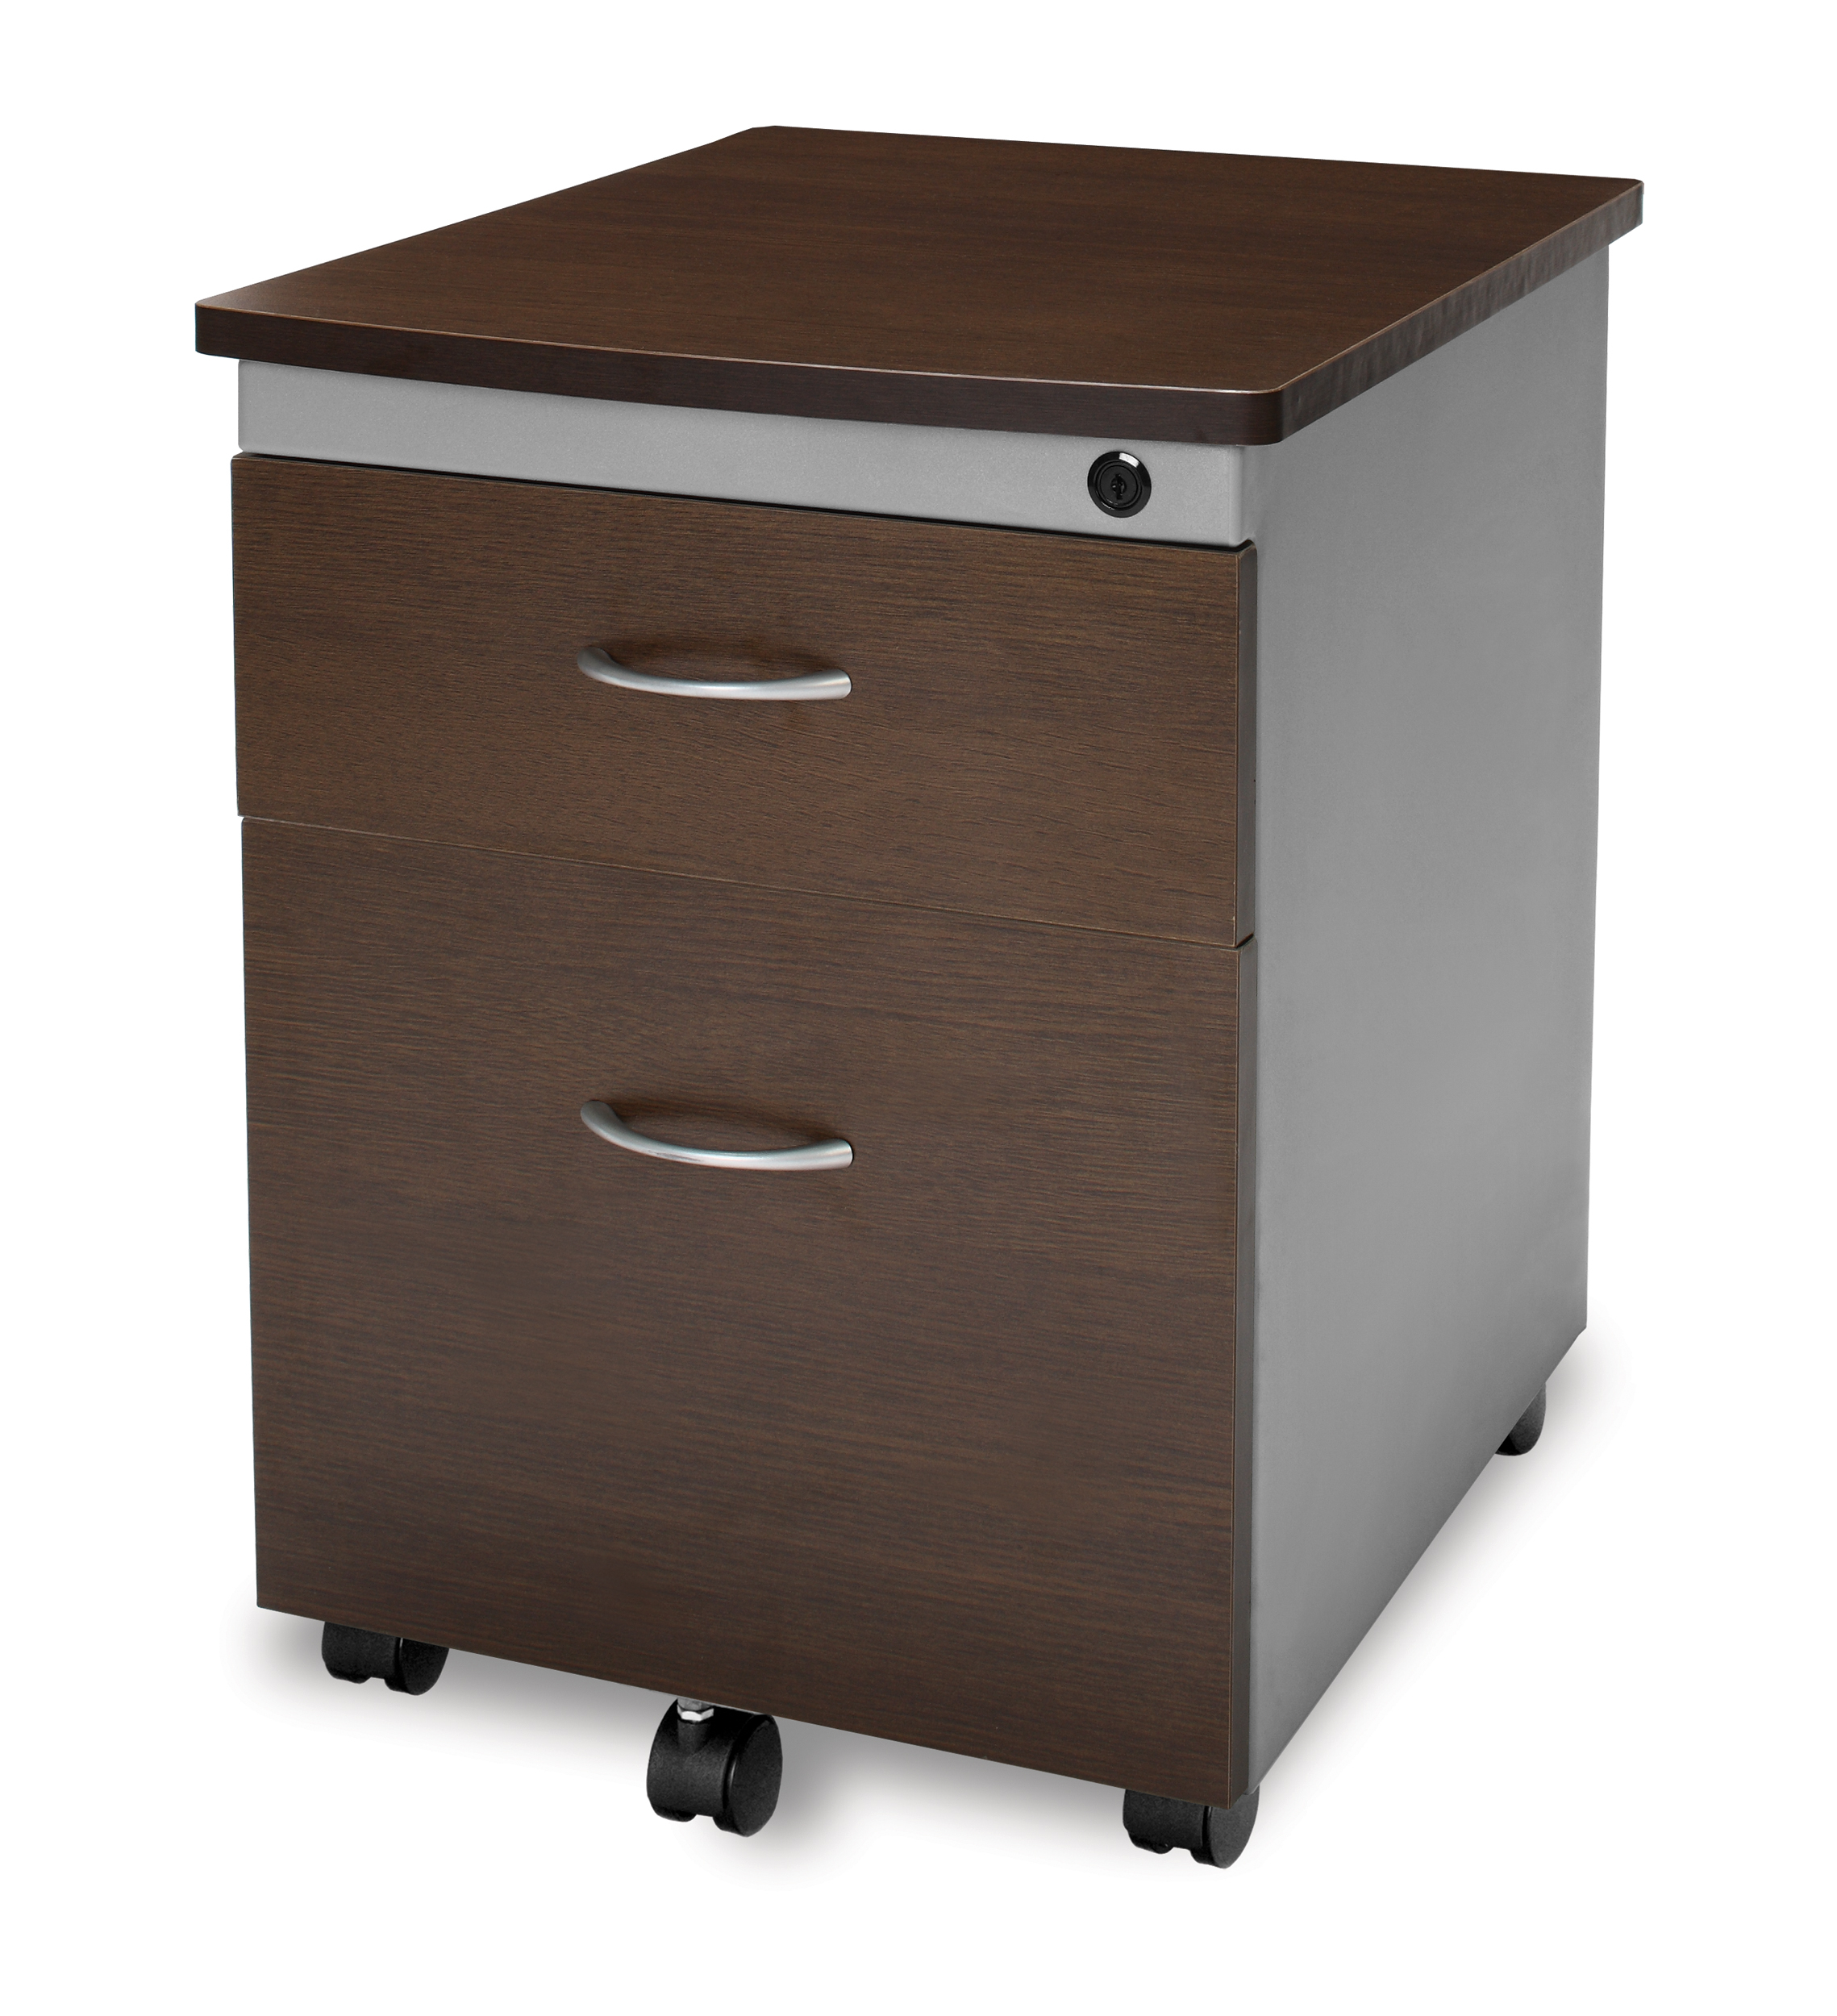 55106 Chy Office Furniture 24 Inch Tall Melamine Top Versatile within proportions 2278 X 2500